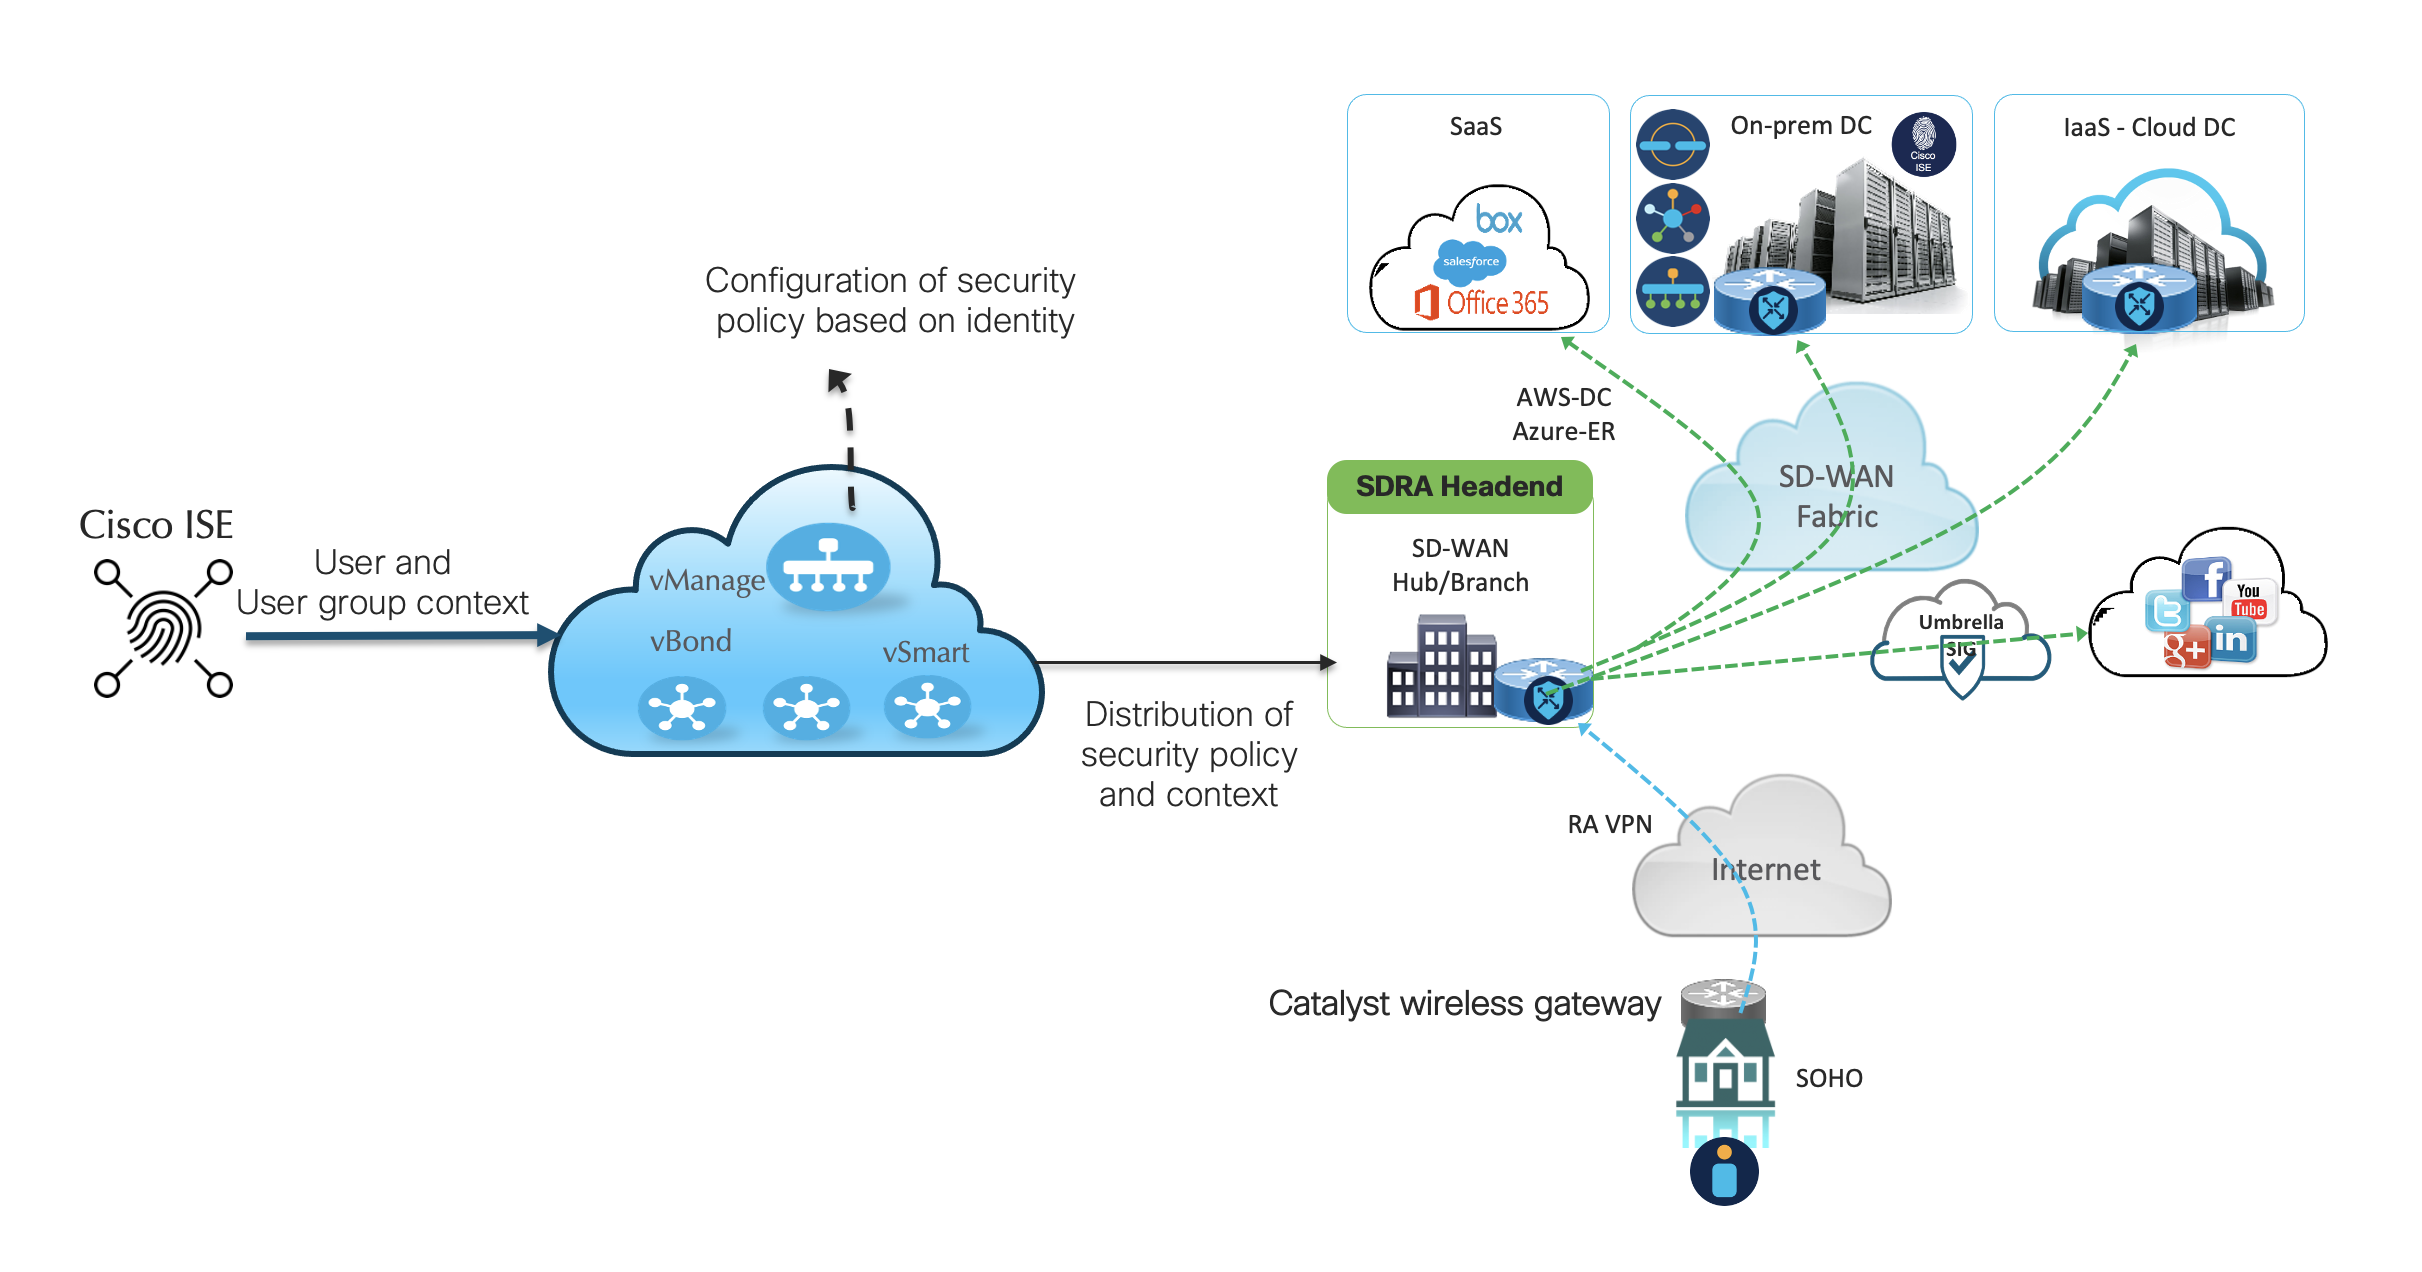  Identity integration for Remote Users using Catalyst Wireless Gateway